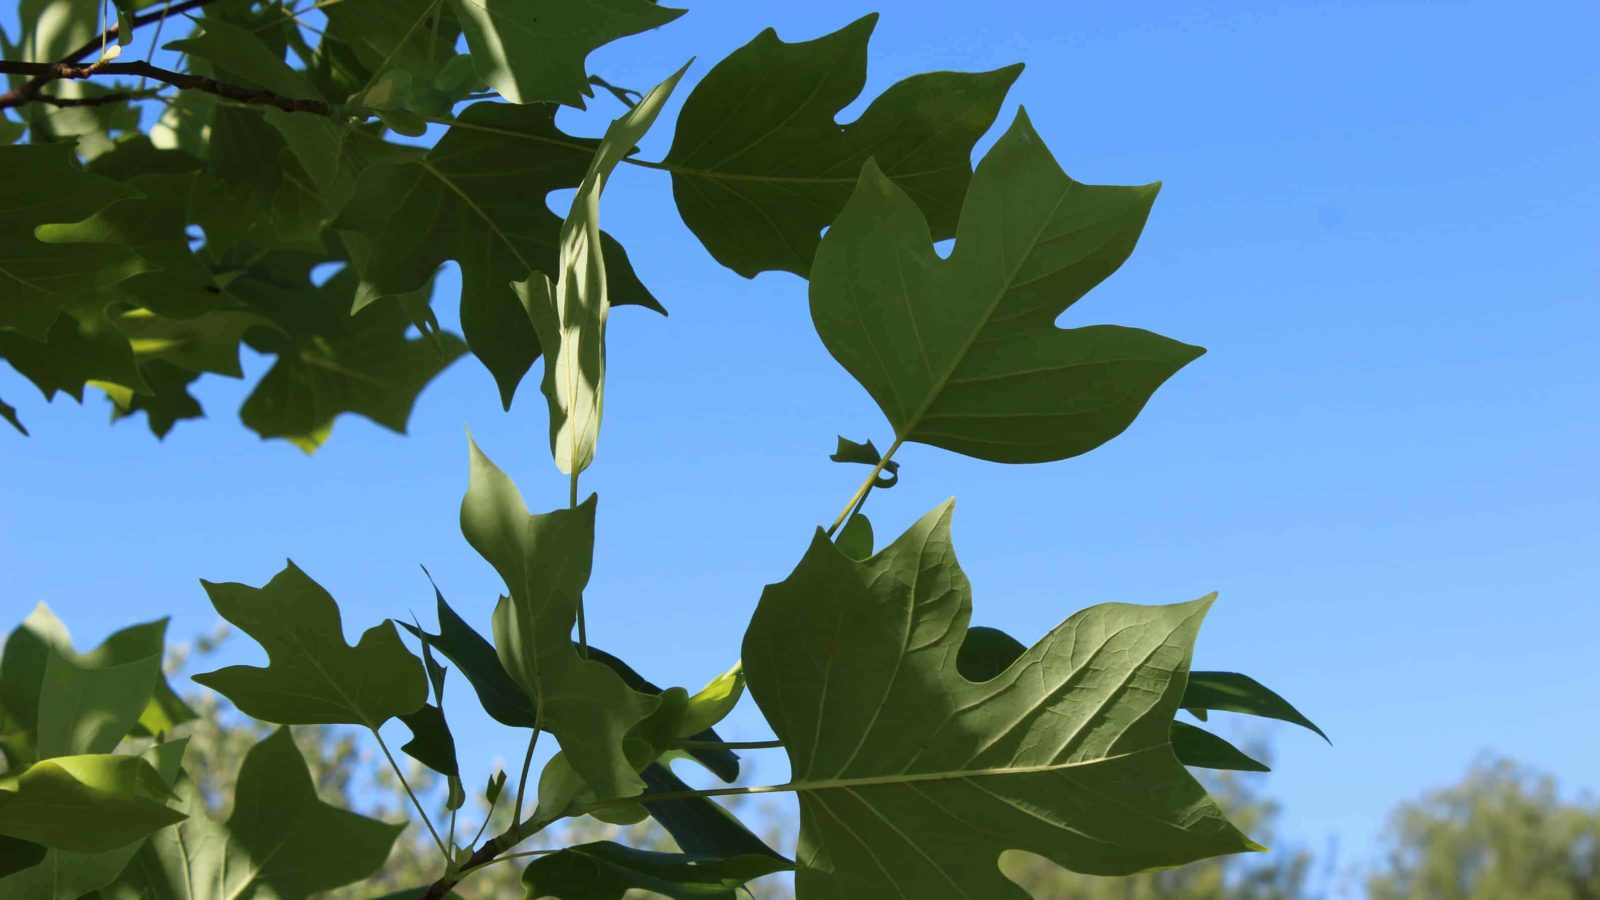 The leaves of a tulip tree catch light and shadow in curves against the sky in the Lanesborough Arboretum.